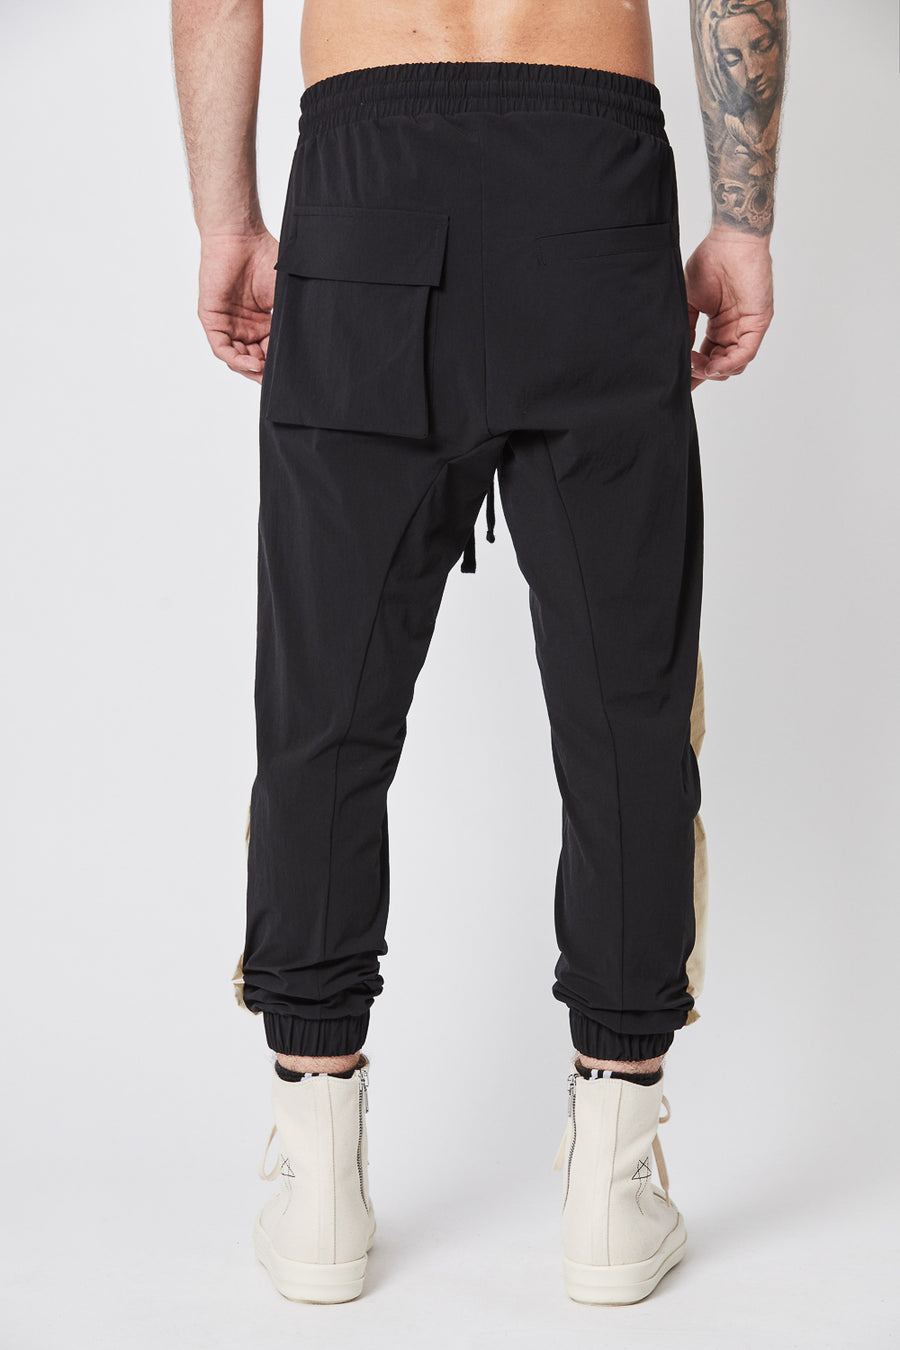 Buy the Thom Krom M ST 362 Sweatpants in Black at Intro. Spend £50 for free UK delivery. Official stockists. We ship worldwide.